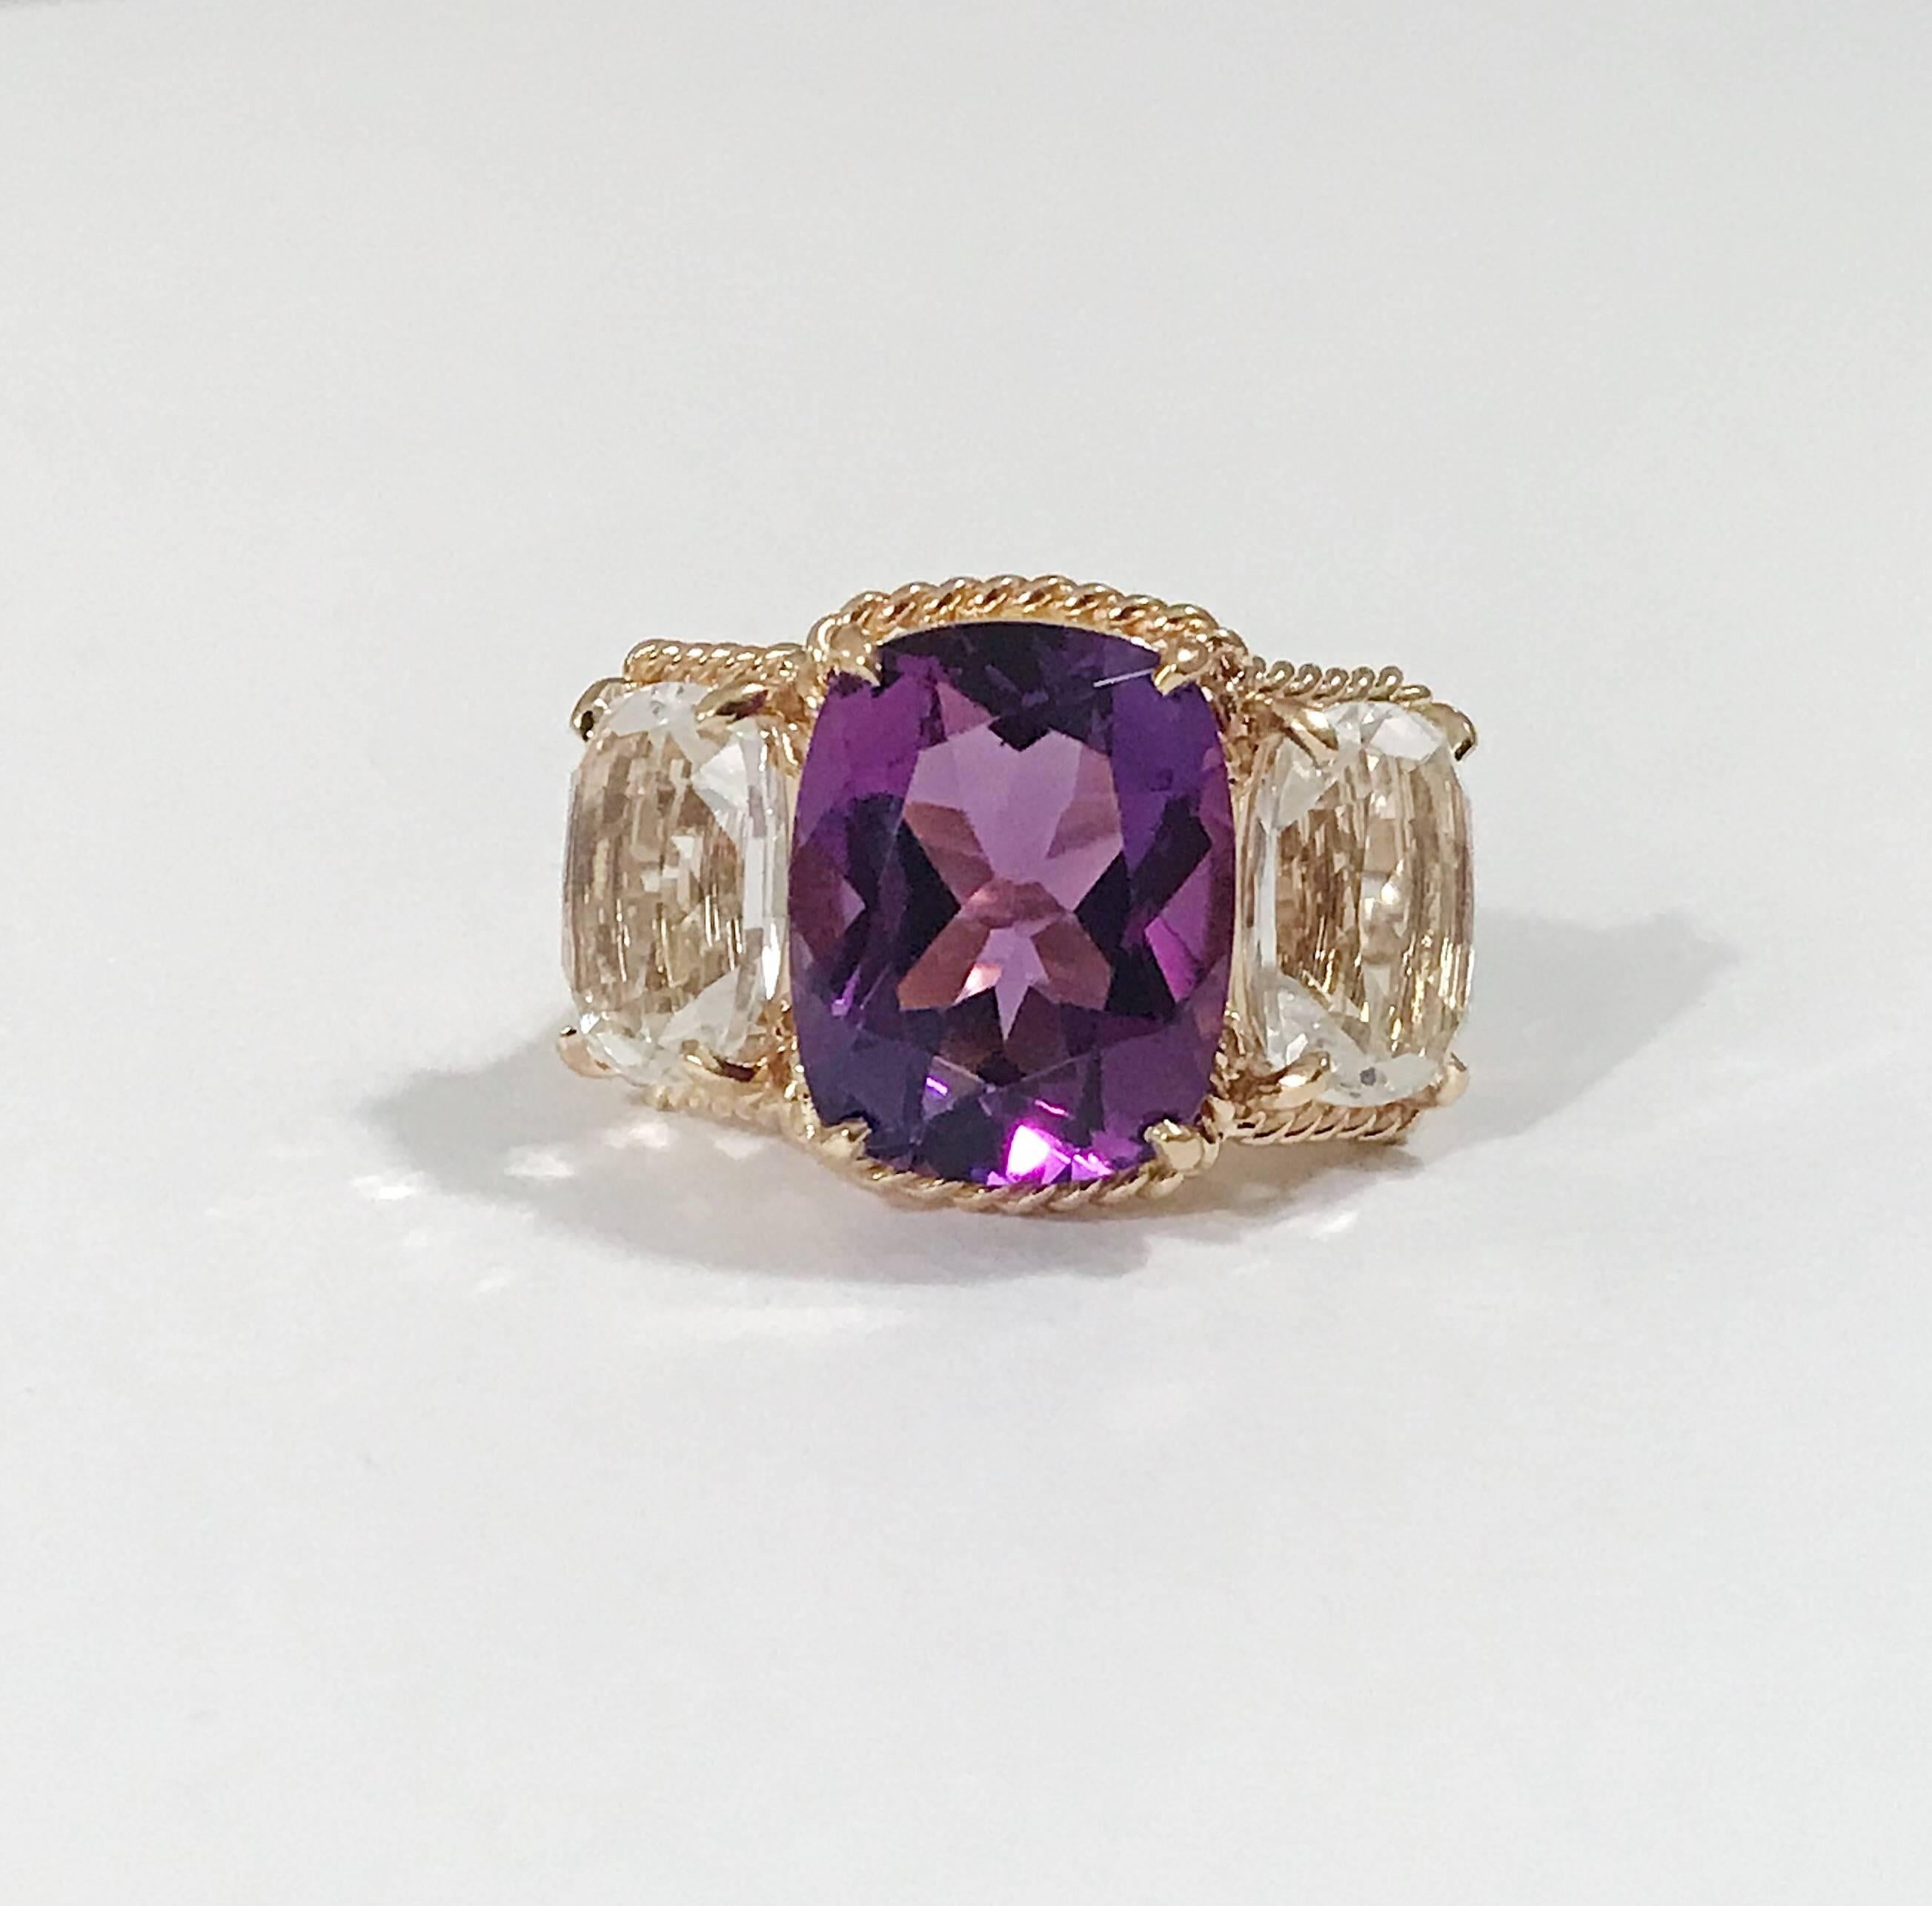 Elegant 18kt Yellow Three Stone Ring with Rope Twist Border with split shank detail.

The ring features faceted cushion cut Purple Amethyst and Rock Crystal stones surrounded by a twisted gold rope. The center Amethyst measures 5/8